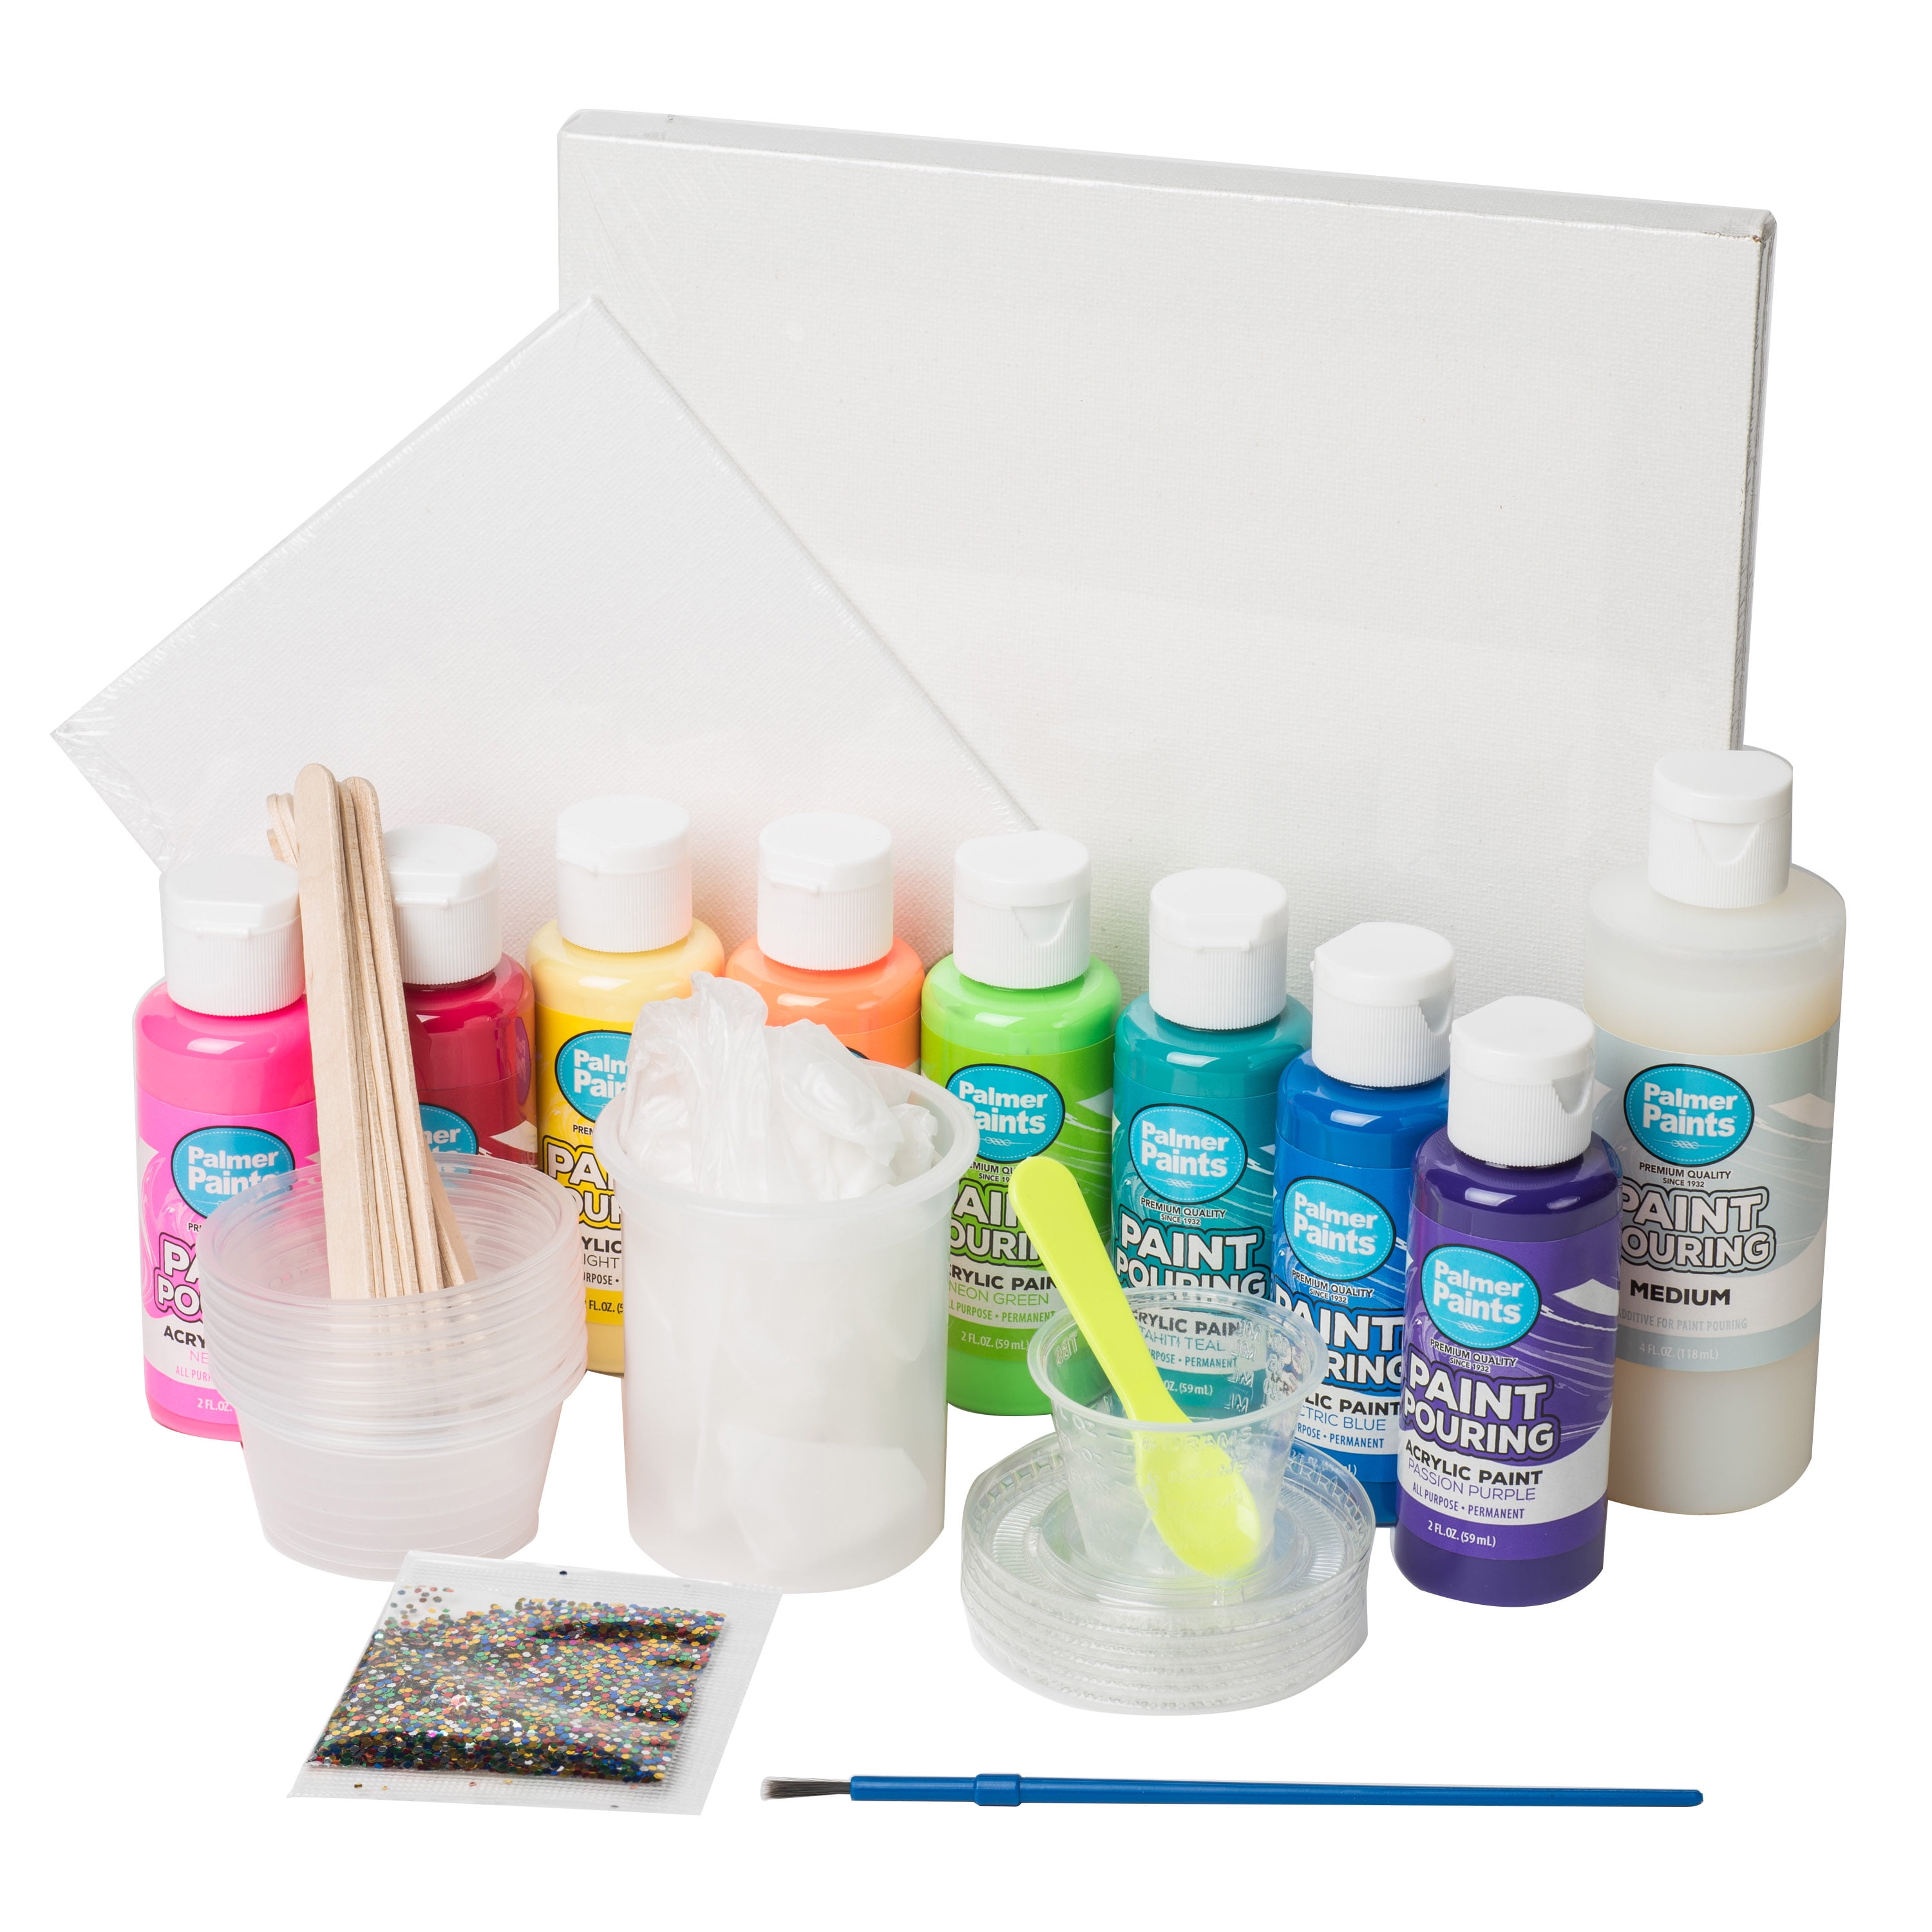 Cra-Z-Art Palmer Acrylic Paint Pouring Art Activity Kit - Rainbow Twist, Size: 12 in x 14in x 3 in